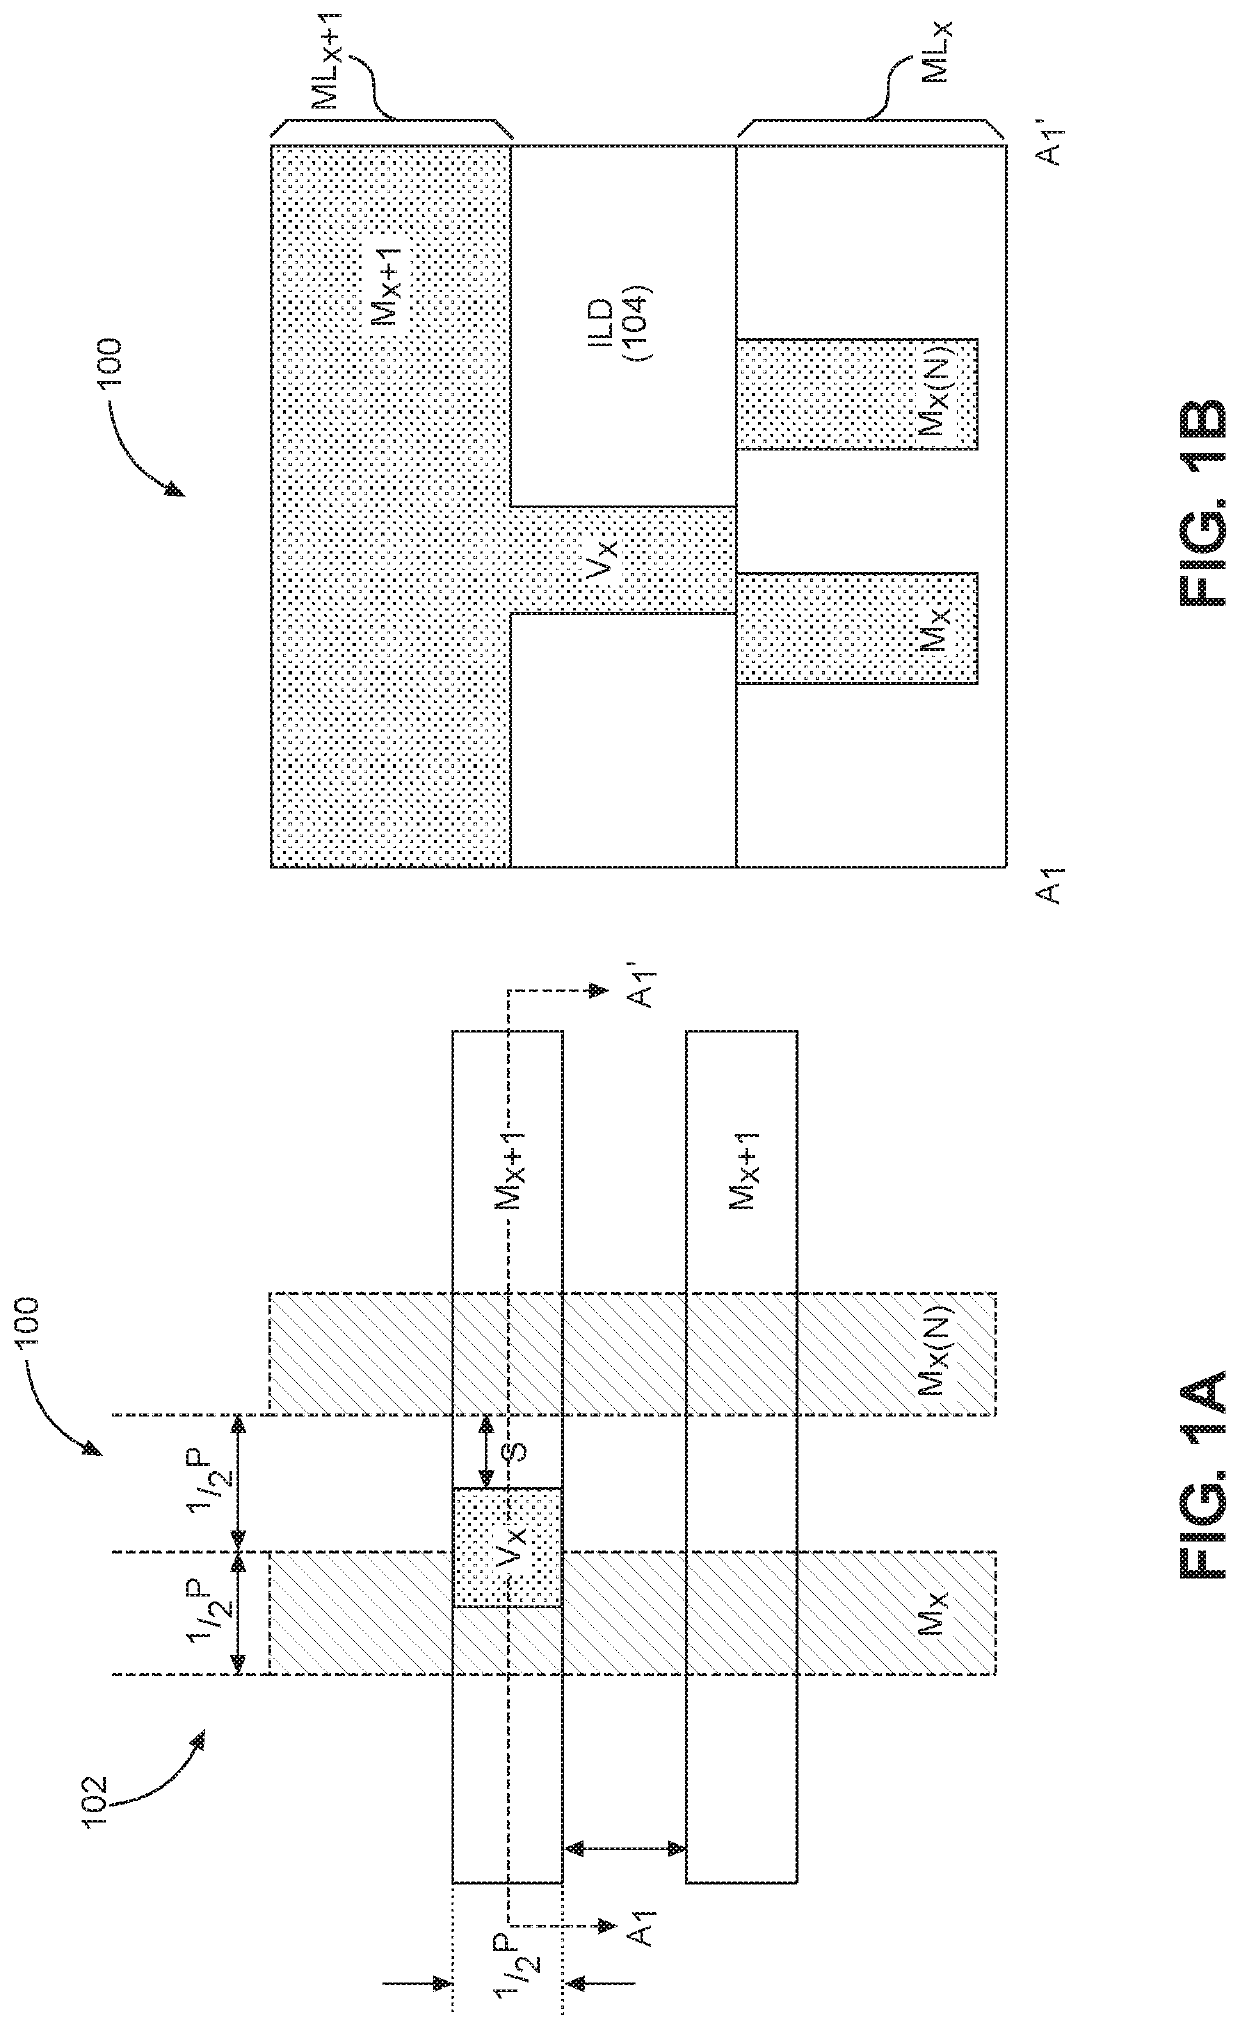 Integrated circuit (IC) interconnect structure having a metal layer with asymmetric metal line-dielectric structures supporting self-aligned vertical interconnect accesses (VIAS)